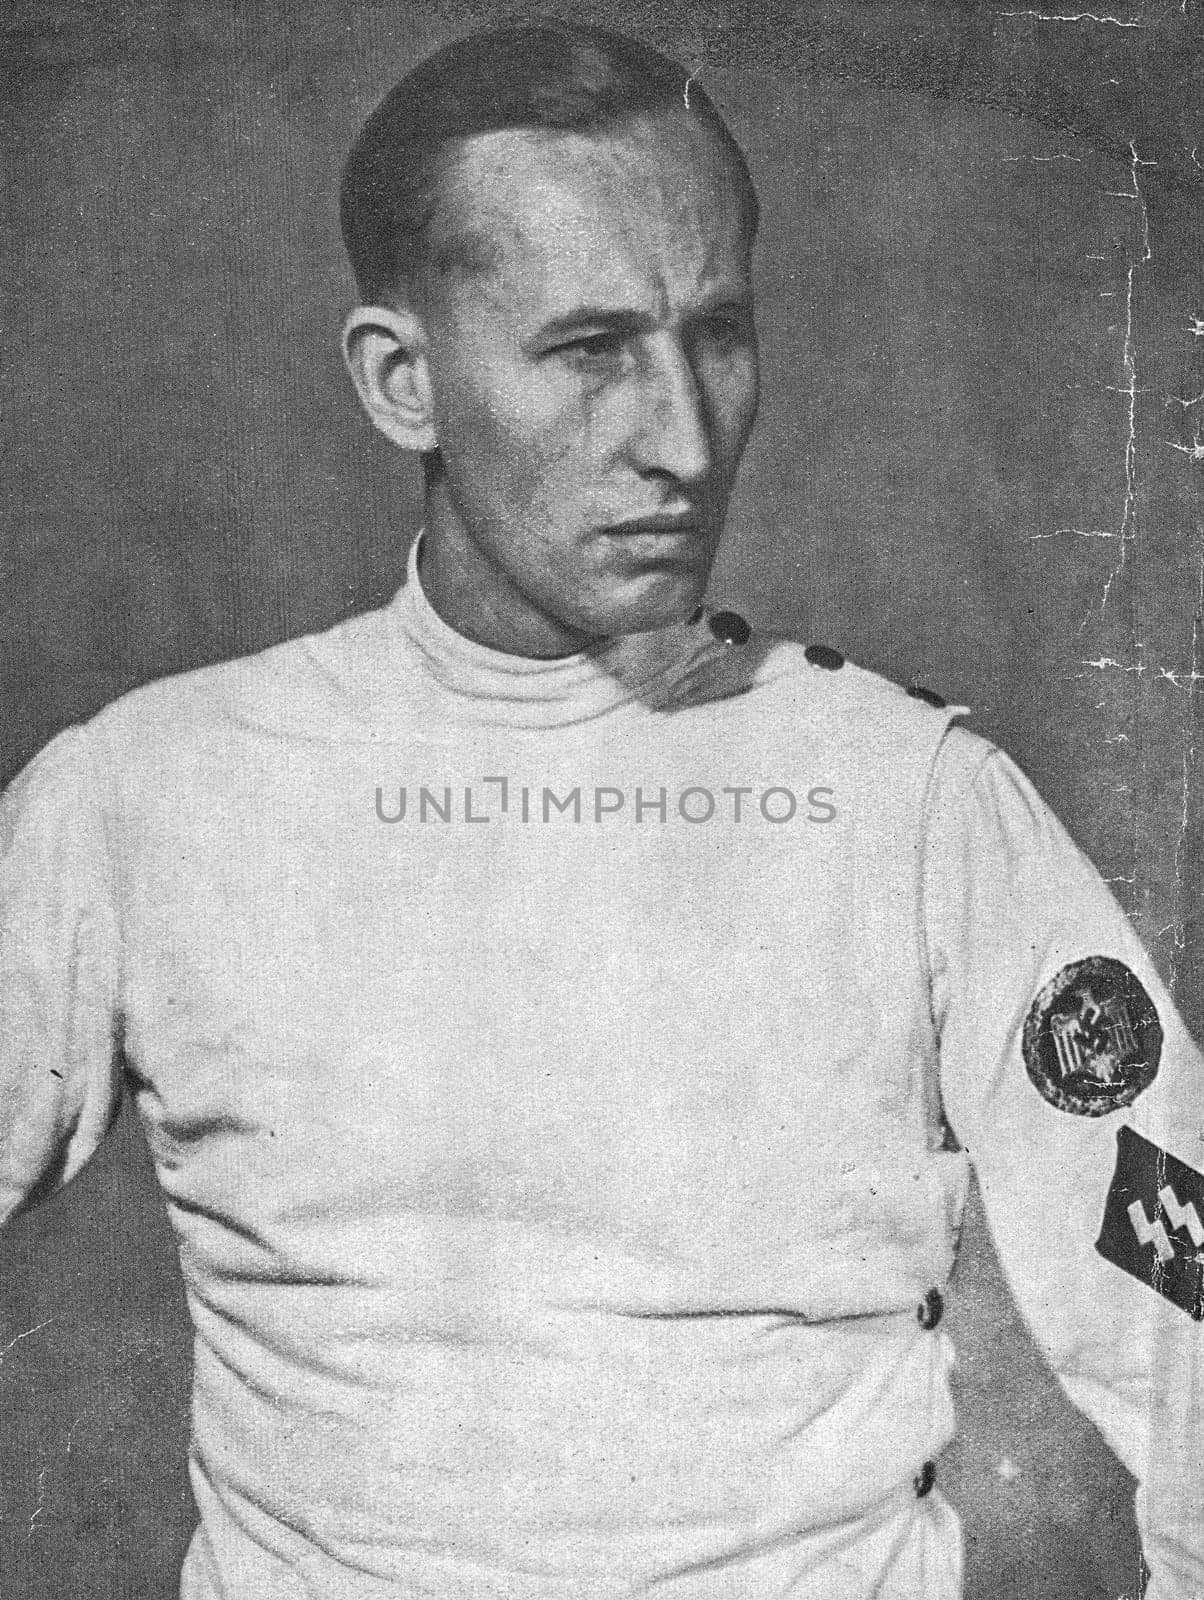 Reinhard Heydrich as a youth, he engaged his younger brother, Heinz, in mock fencing duels. He excelled in his schoolwork. A talented athlete, he became an expert swimmer and fencer. by roman_nerud